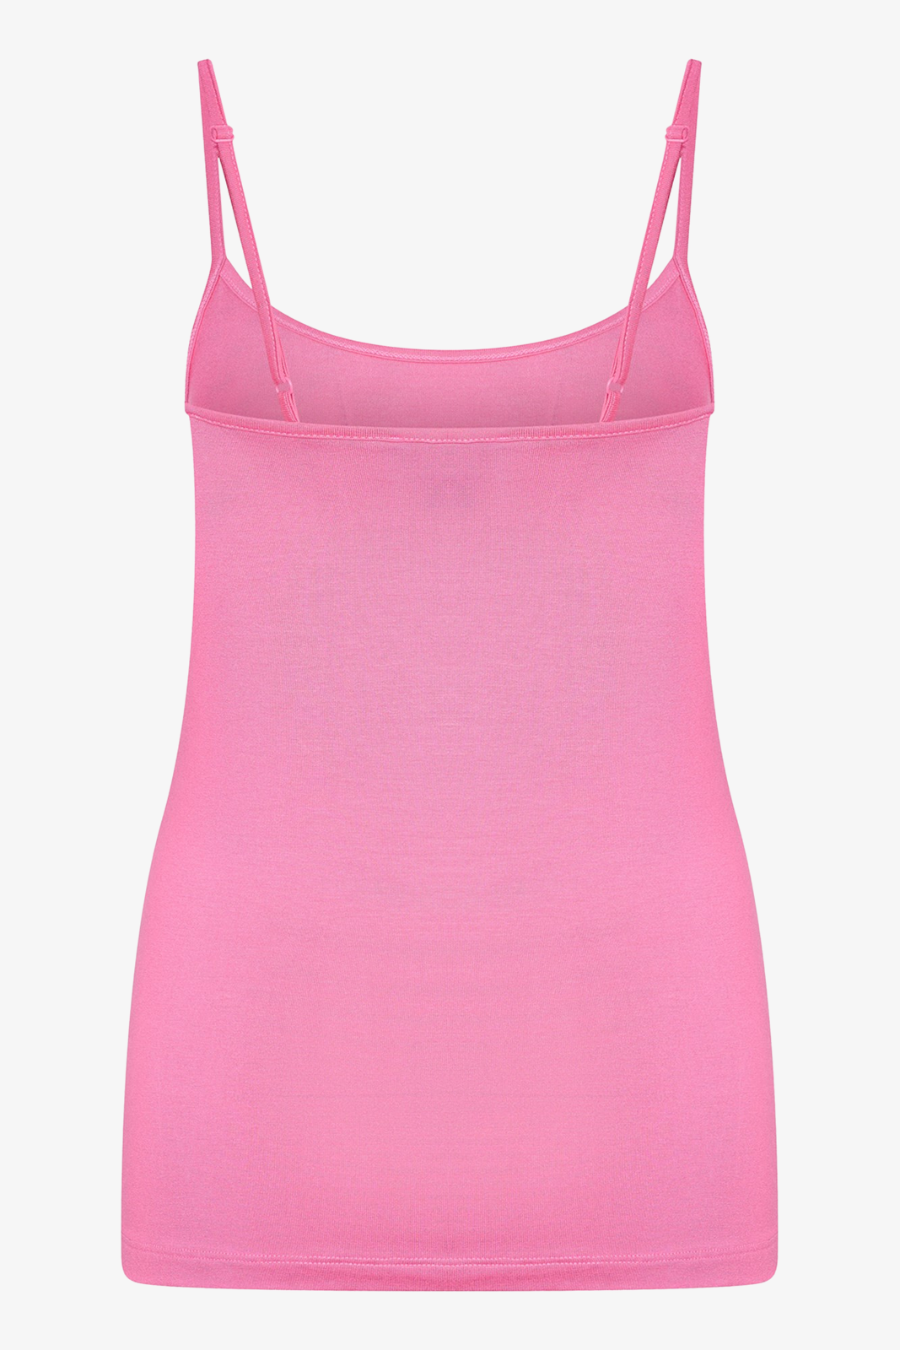 Tank Top with Adjustable Straps